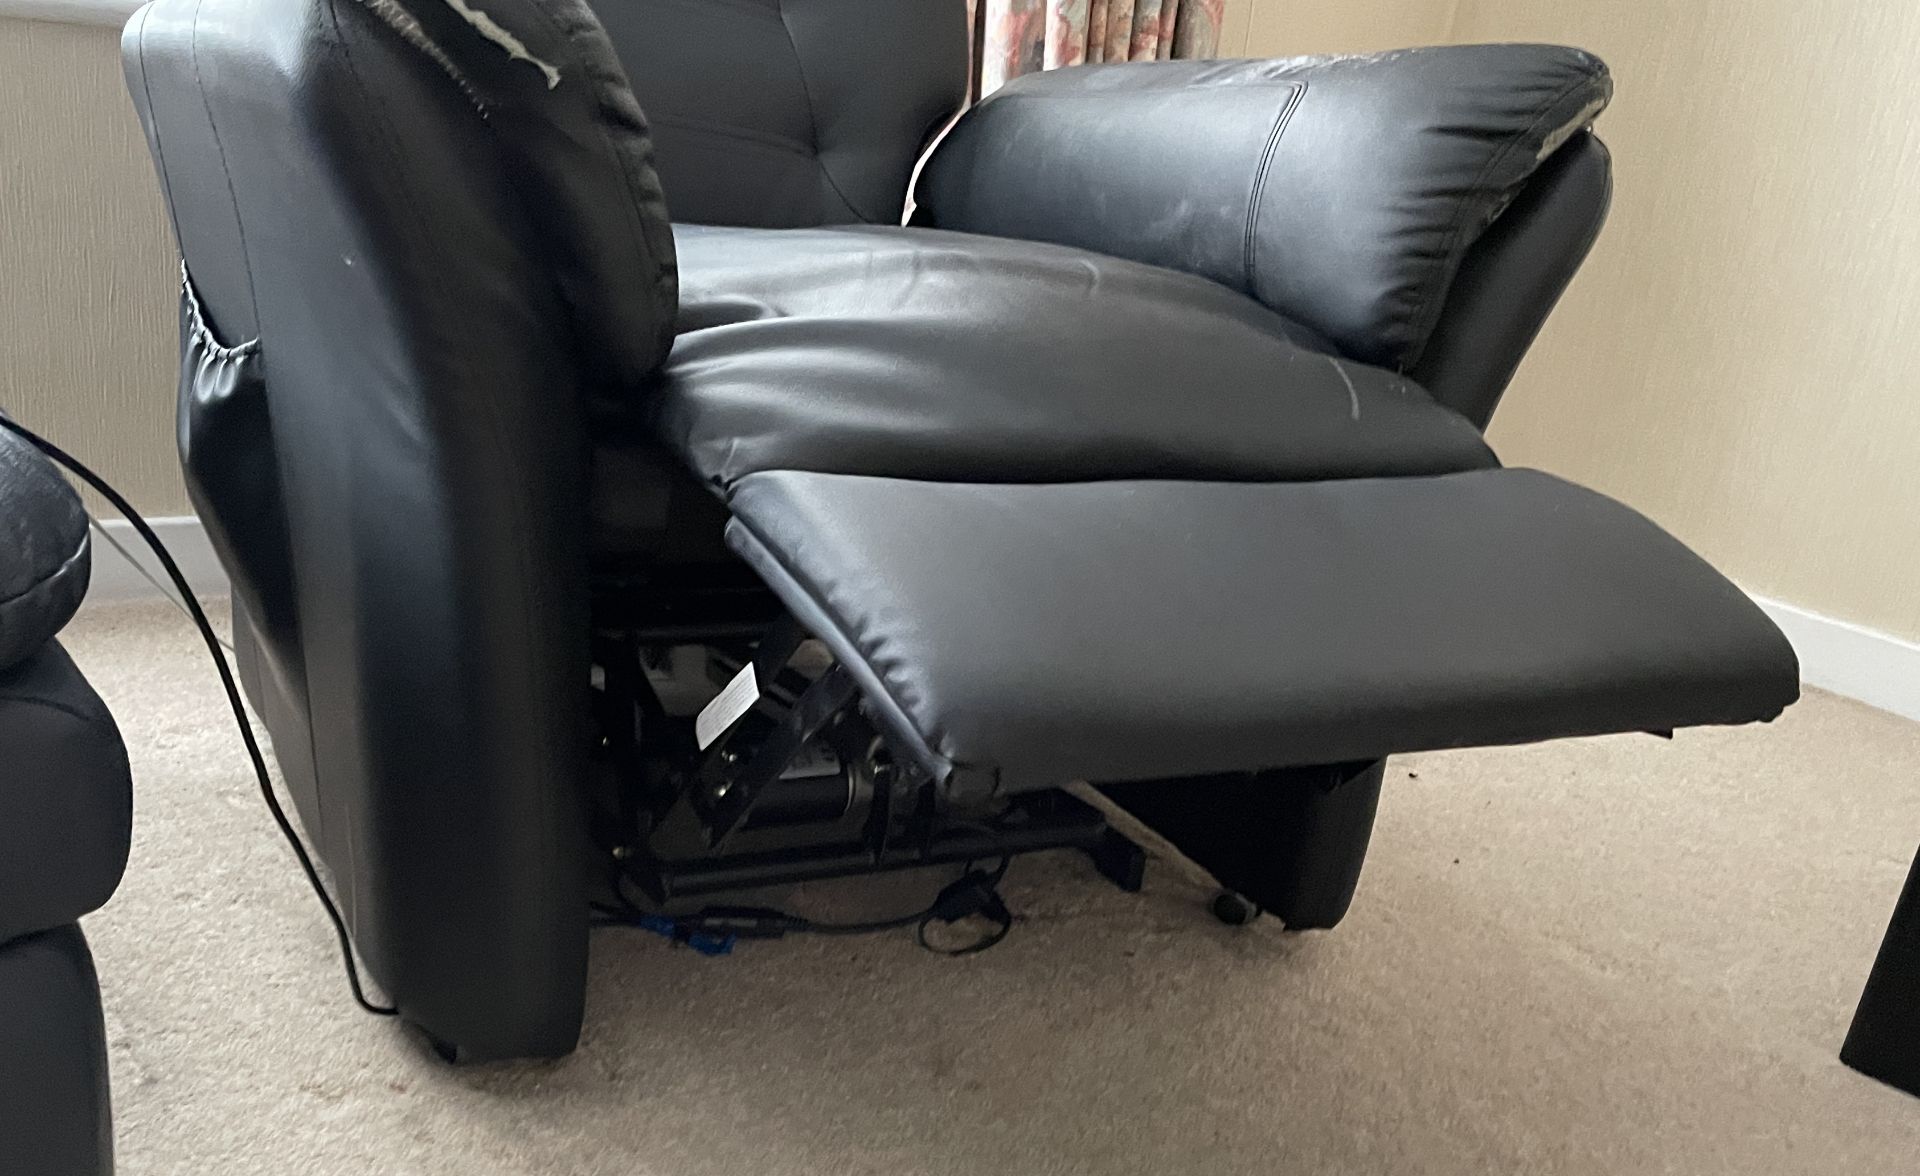 1 x Stylish Motorised Recliner Chair In Black - From An Exclusive Property In Leeds - No VAT on - Image 7 of 7